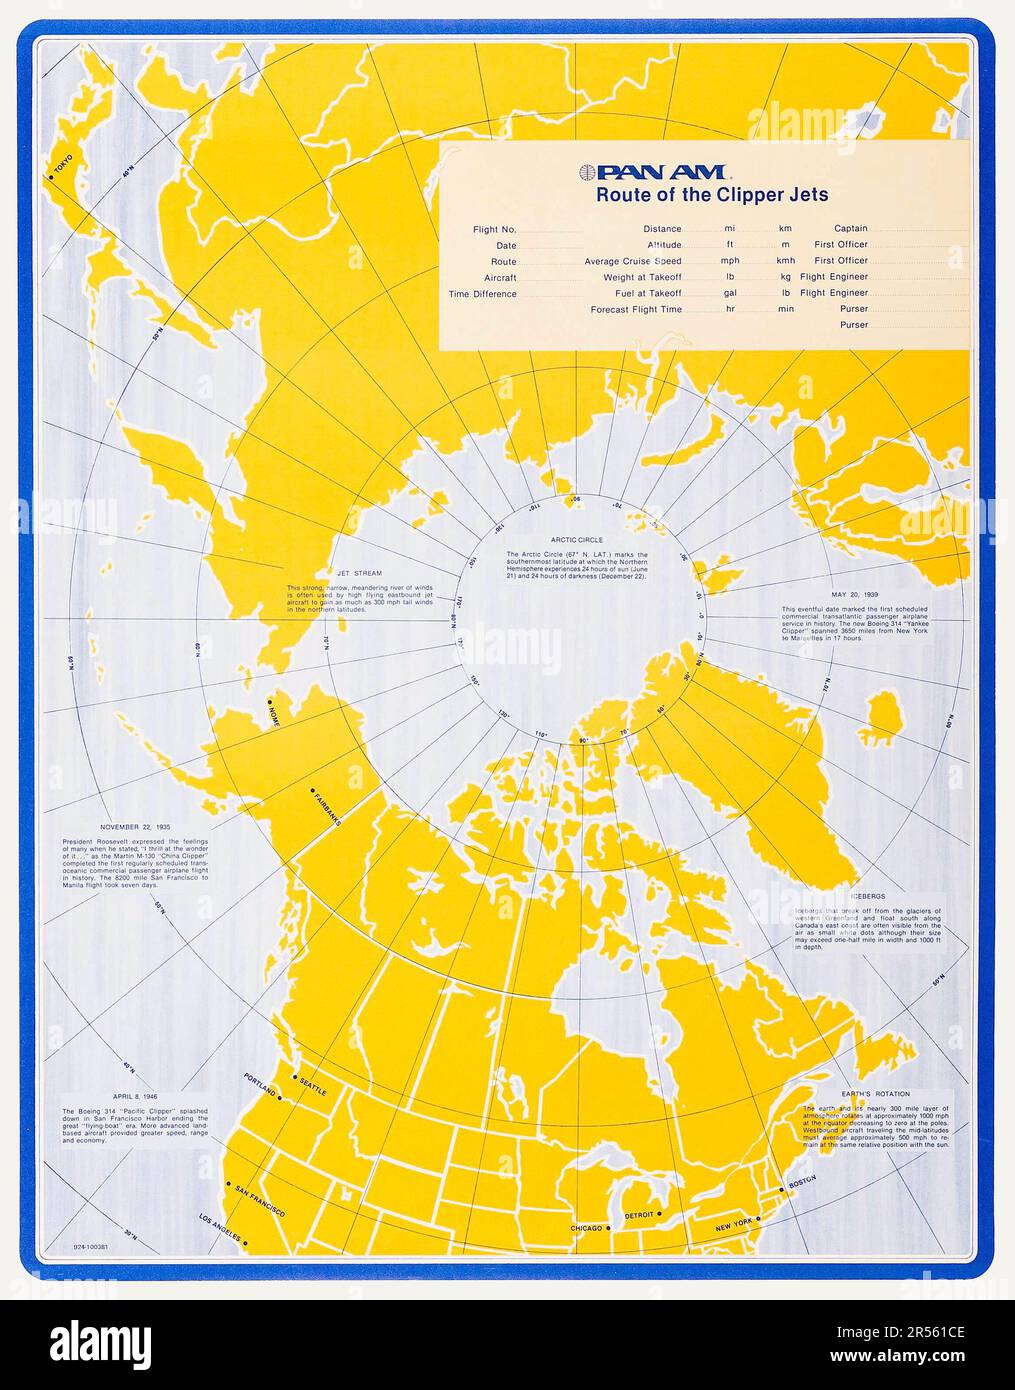 Pan Am Route of the Clipper Jets (Pan Am, 1970s). Travel Poster - Map Stock Photo